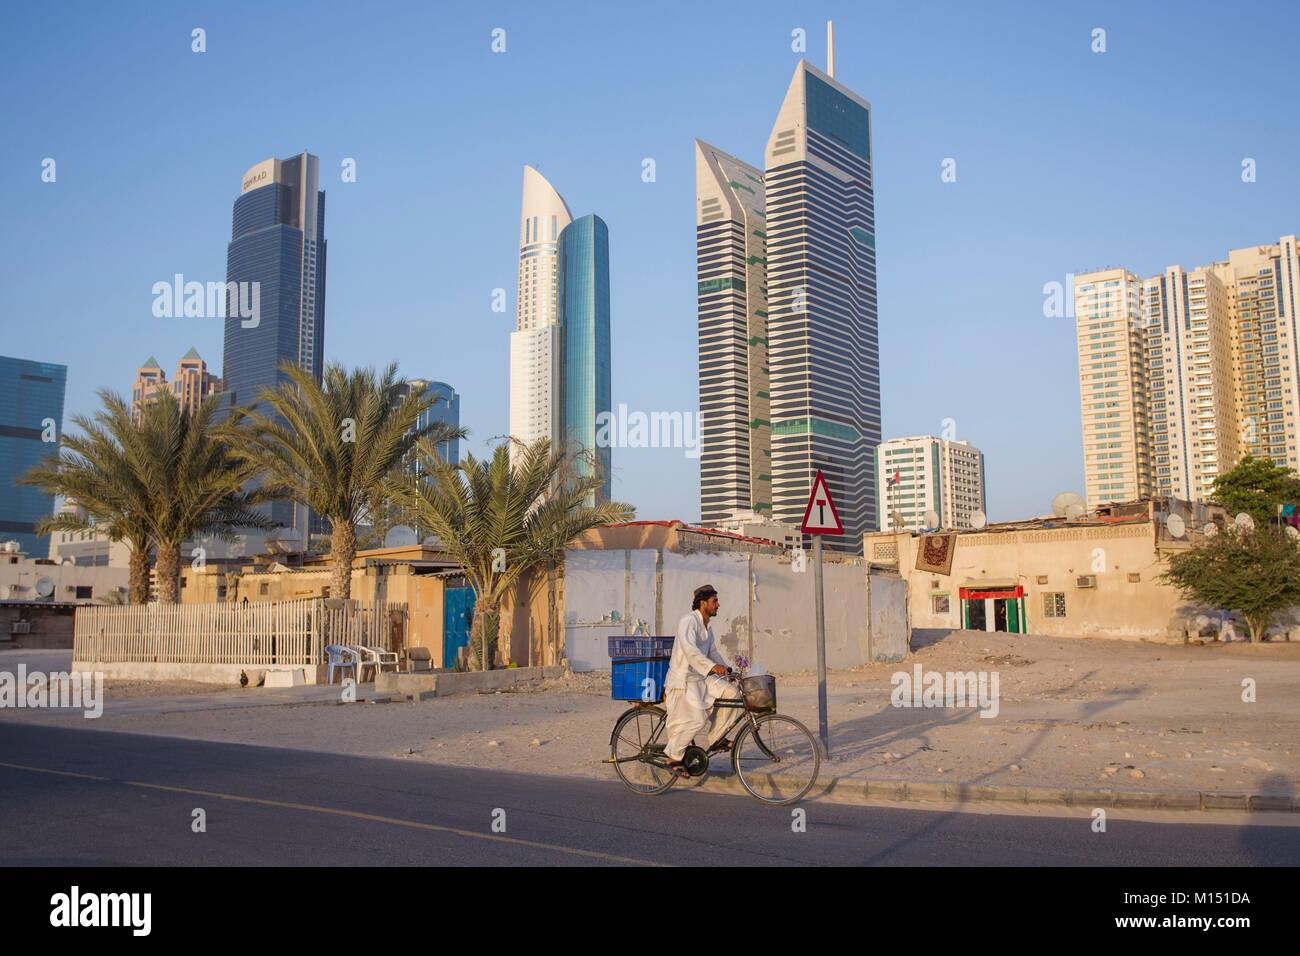 United Arab Emirates, Dubai, Sheikh Zayed skyline with ancient house and workers Stock Photo